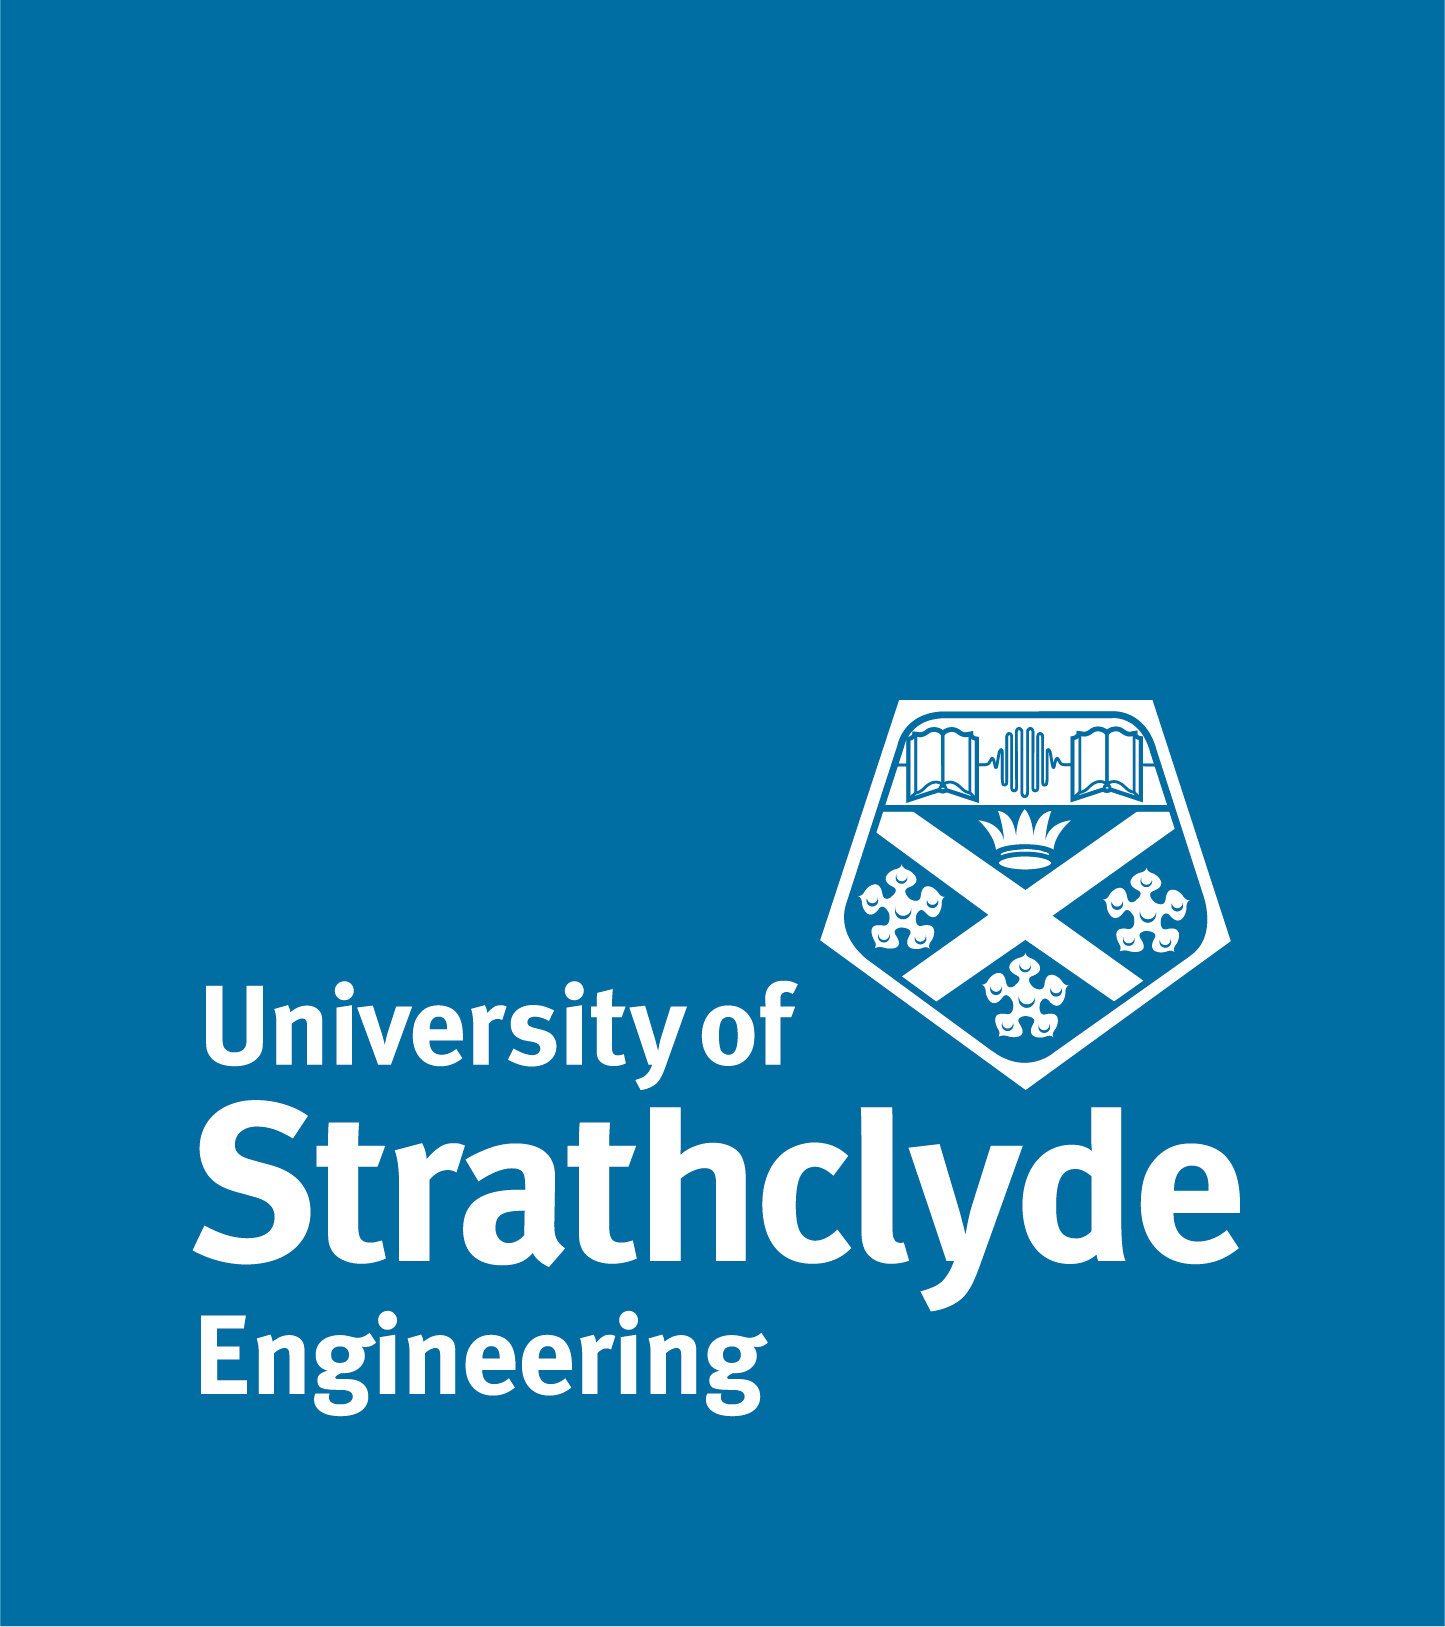 blue background with white university logo and university of strathclyde engineering in white text